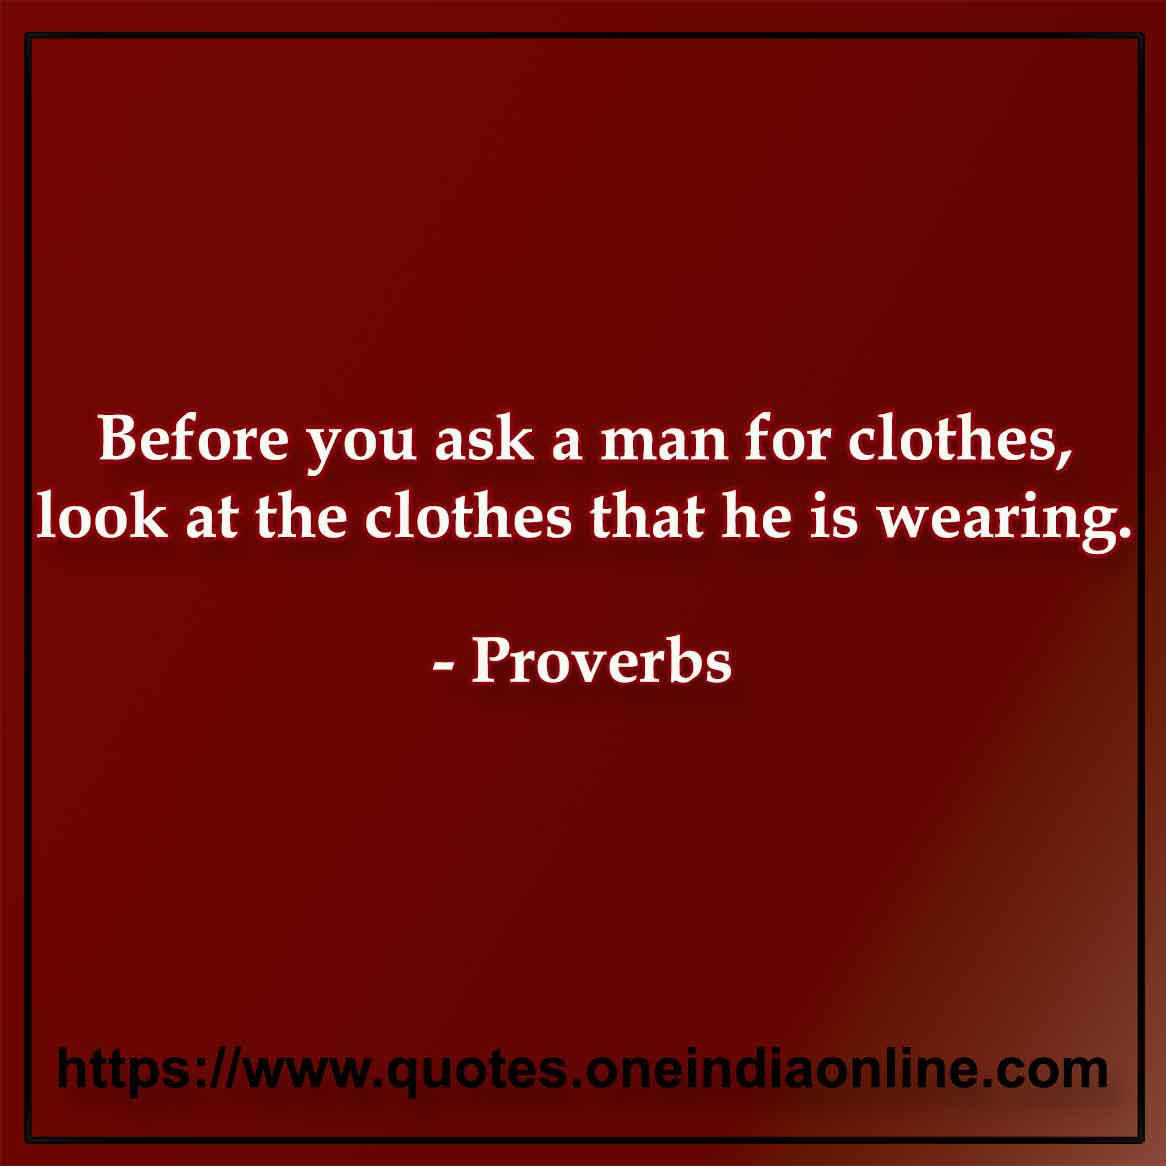 Before you ask a man for clothes, look at the clothes that he is wearing.

